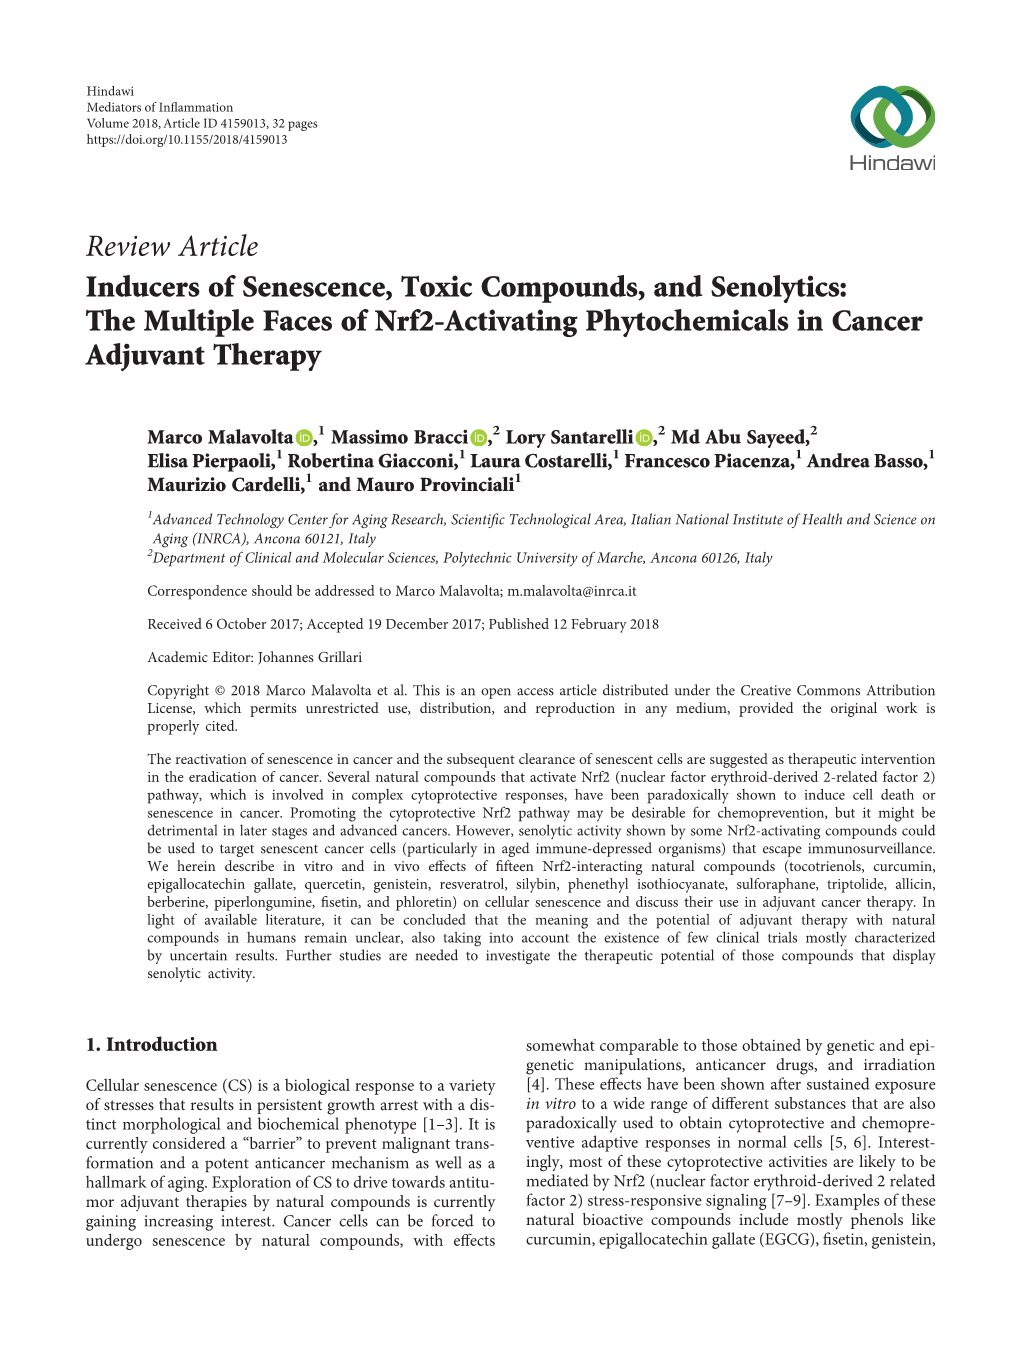 Inducers of Senescence, Toxic Compounds, and Senolytics: the Multiple Faces of Nrf2-Activating Phytochemicals in Cancer Adjuvant Therapy